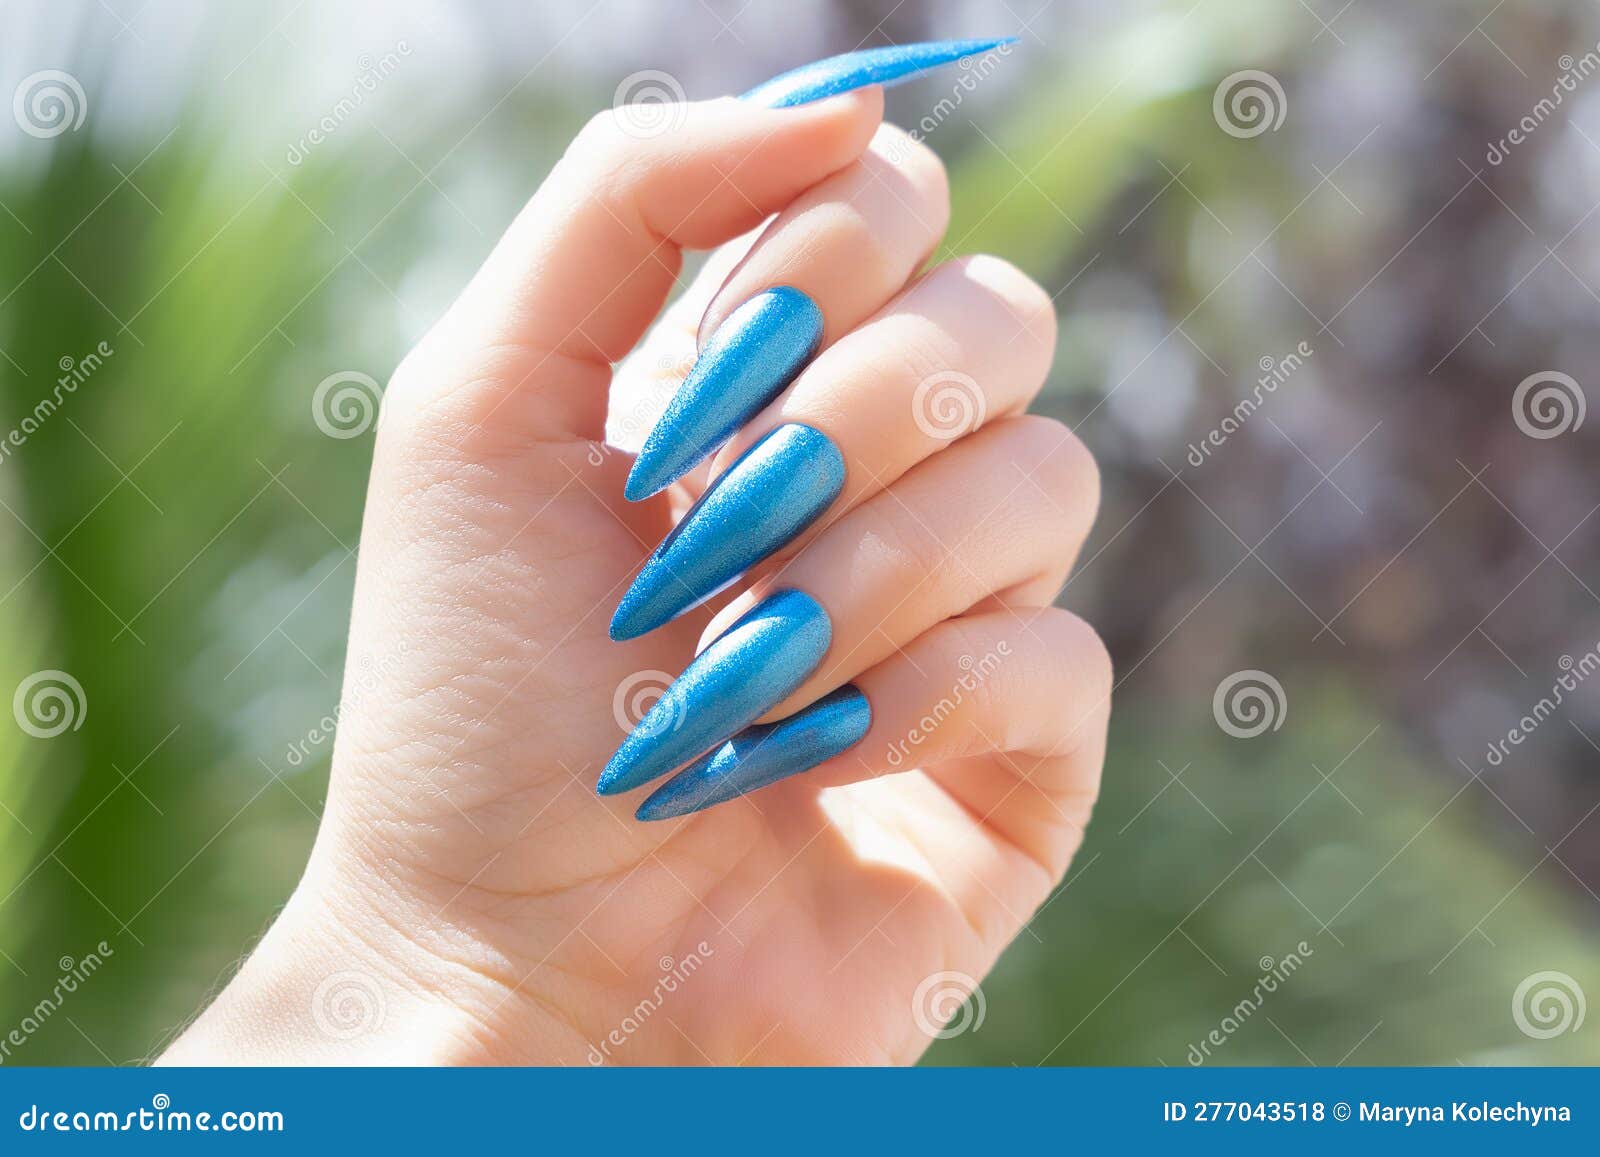 Blue nail polish and surgical team - wide 6